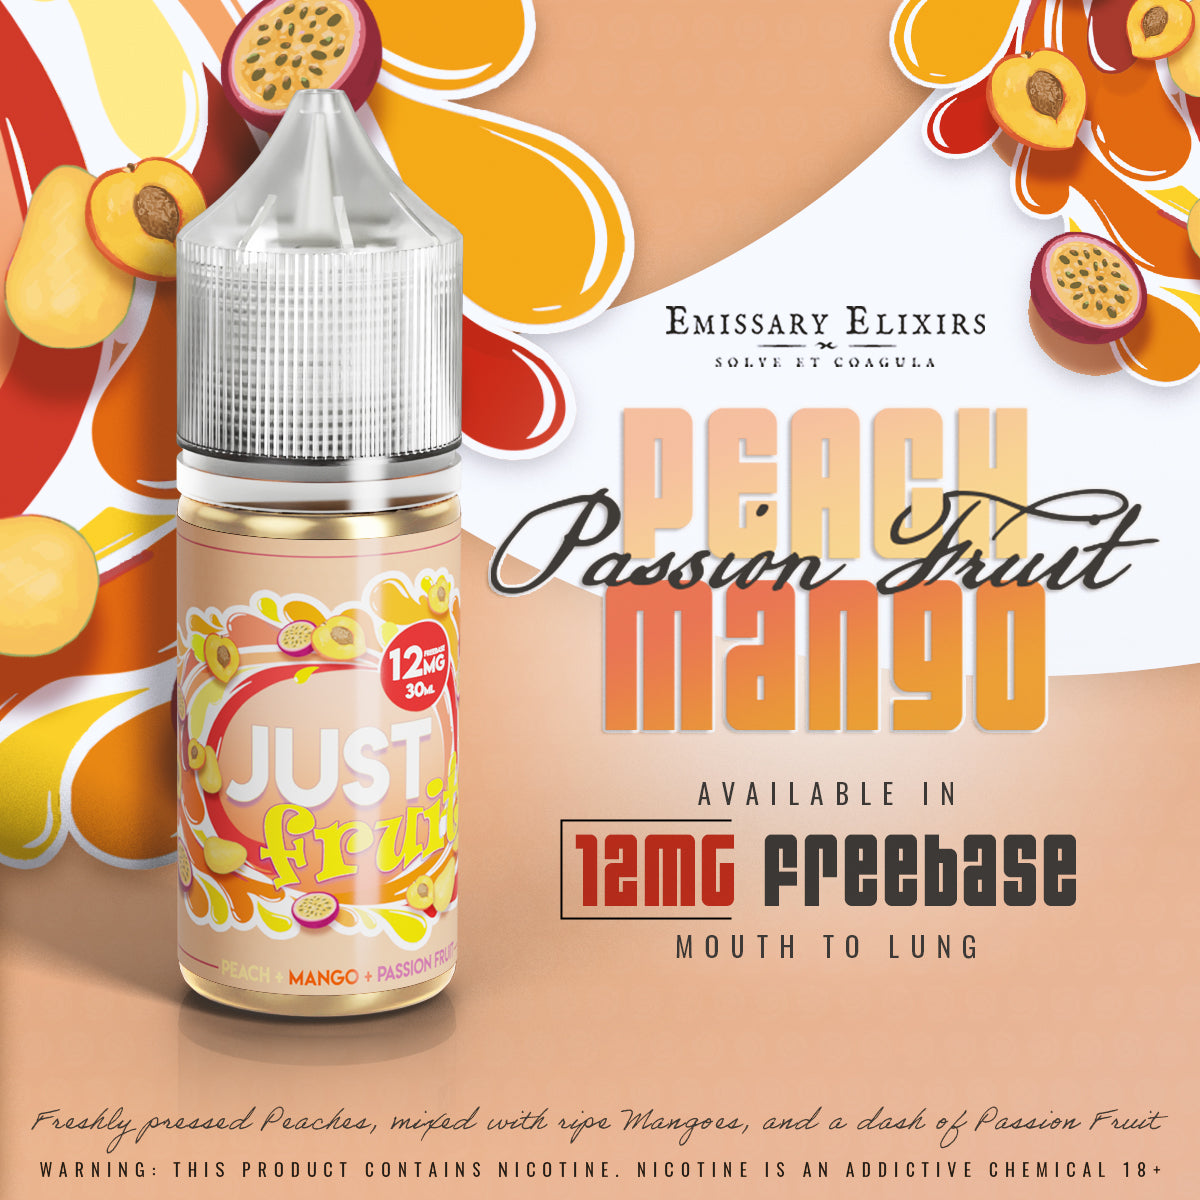 Emissary Elixirs Just Fruit MTL 12mg